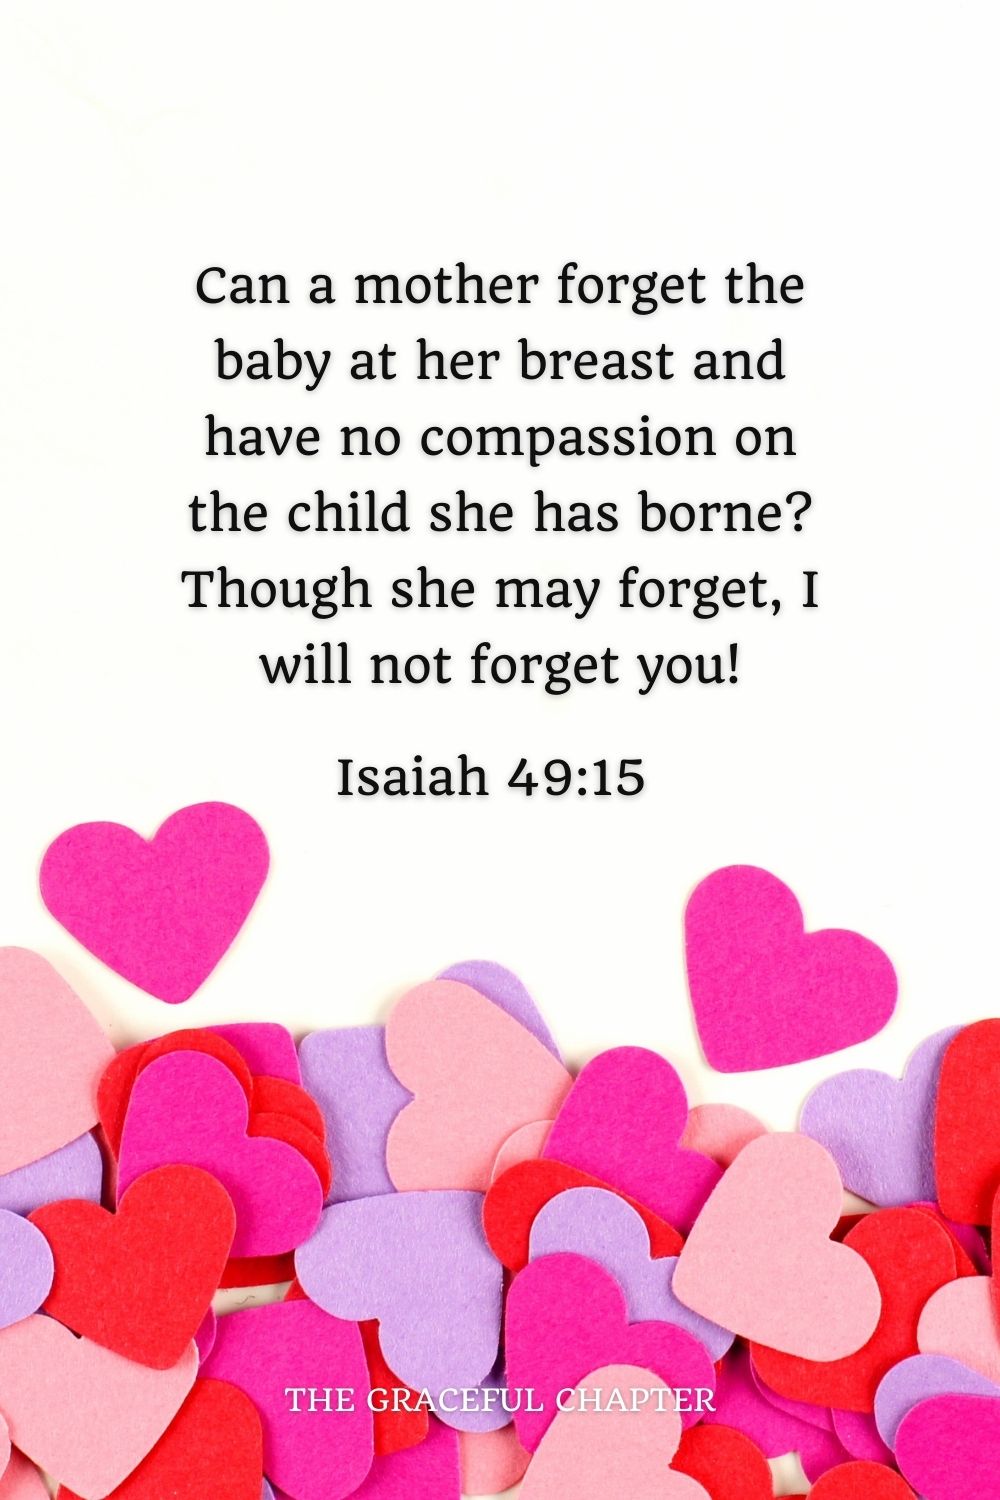 Can a mother forget the baby at her breast and have no compassion on the child she has borne? Though she may forget, I will not forget you! Isaiah 49:15 